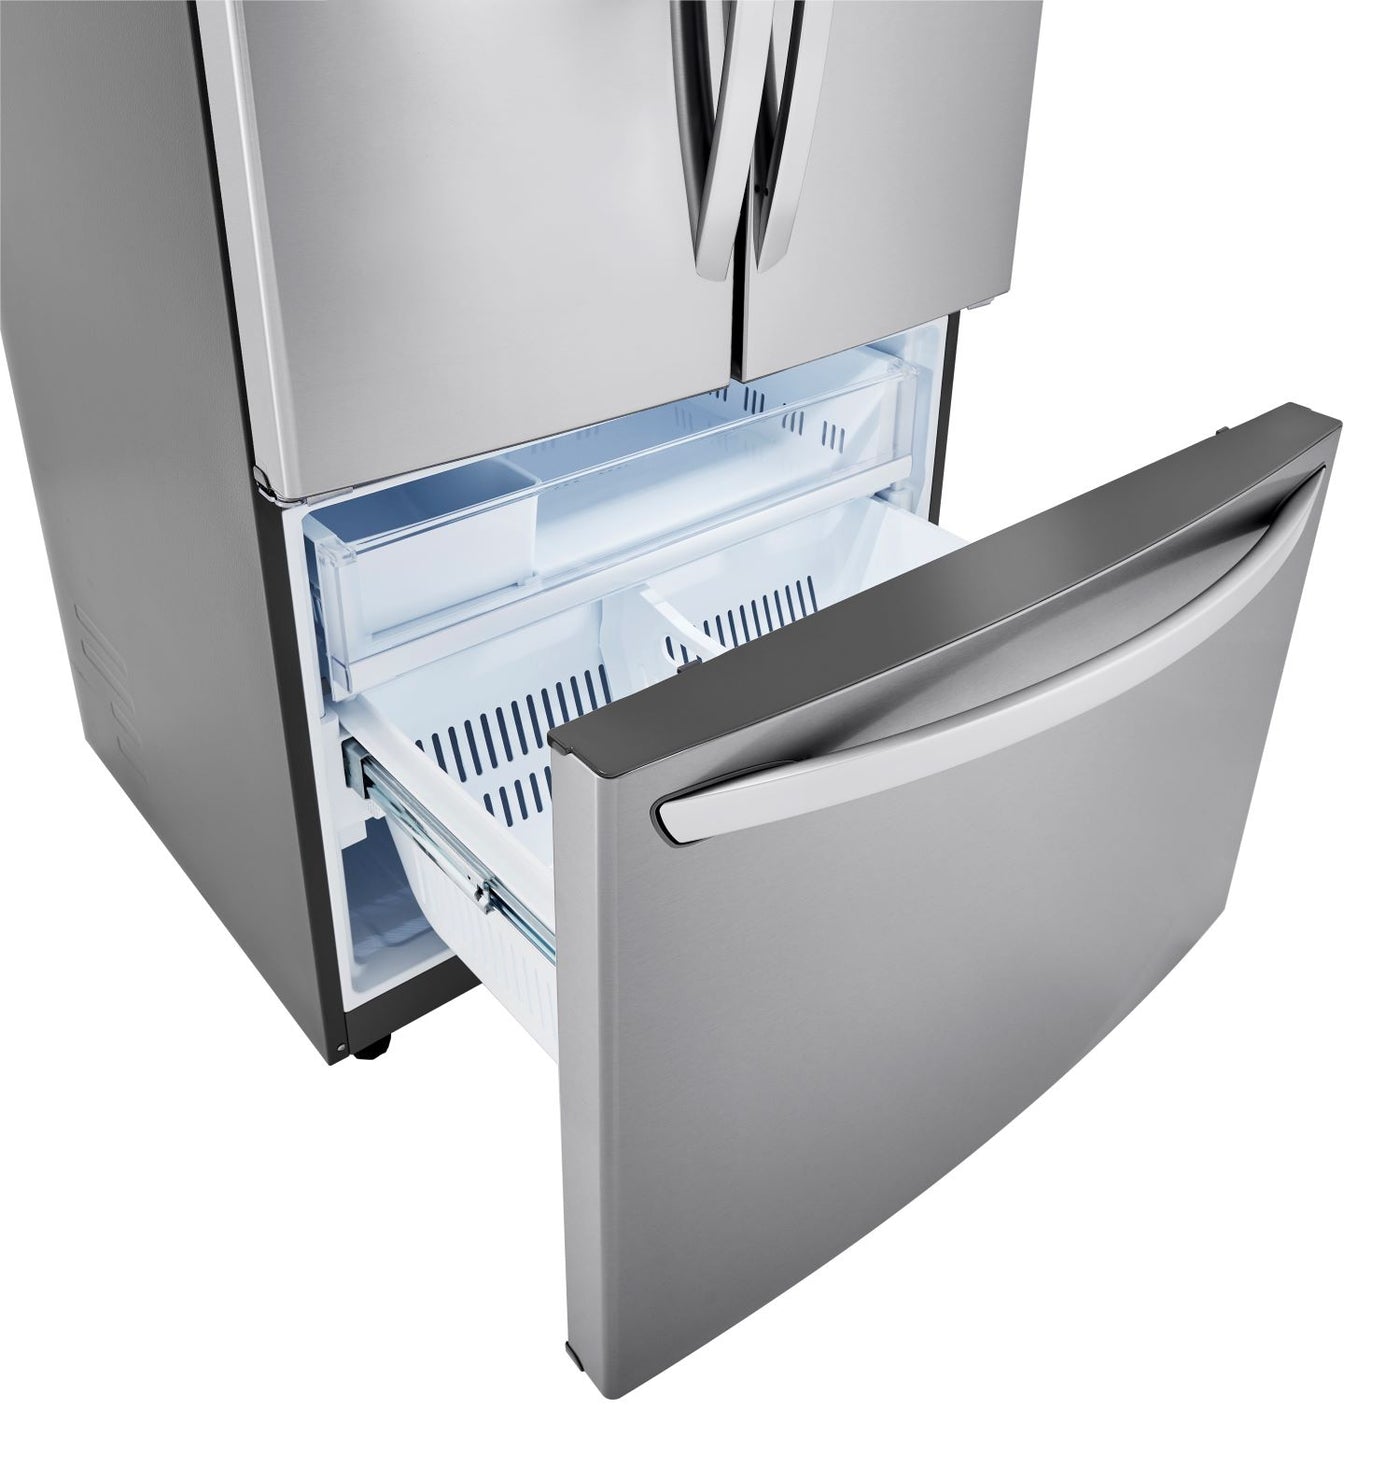 LG Stainless Steel Smart French Door Refrigerator (29 Cu. Ft) - LRFCS29D6S